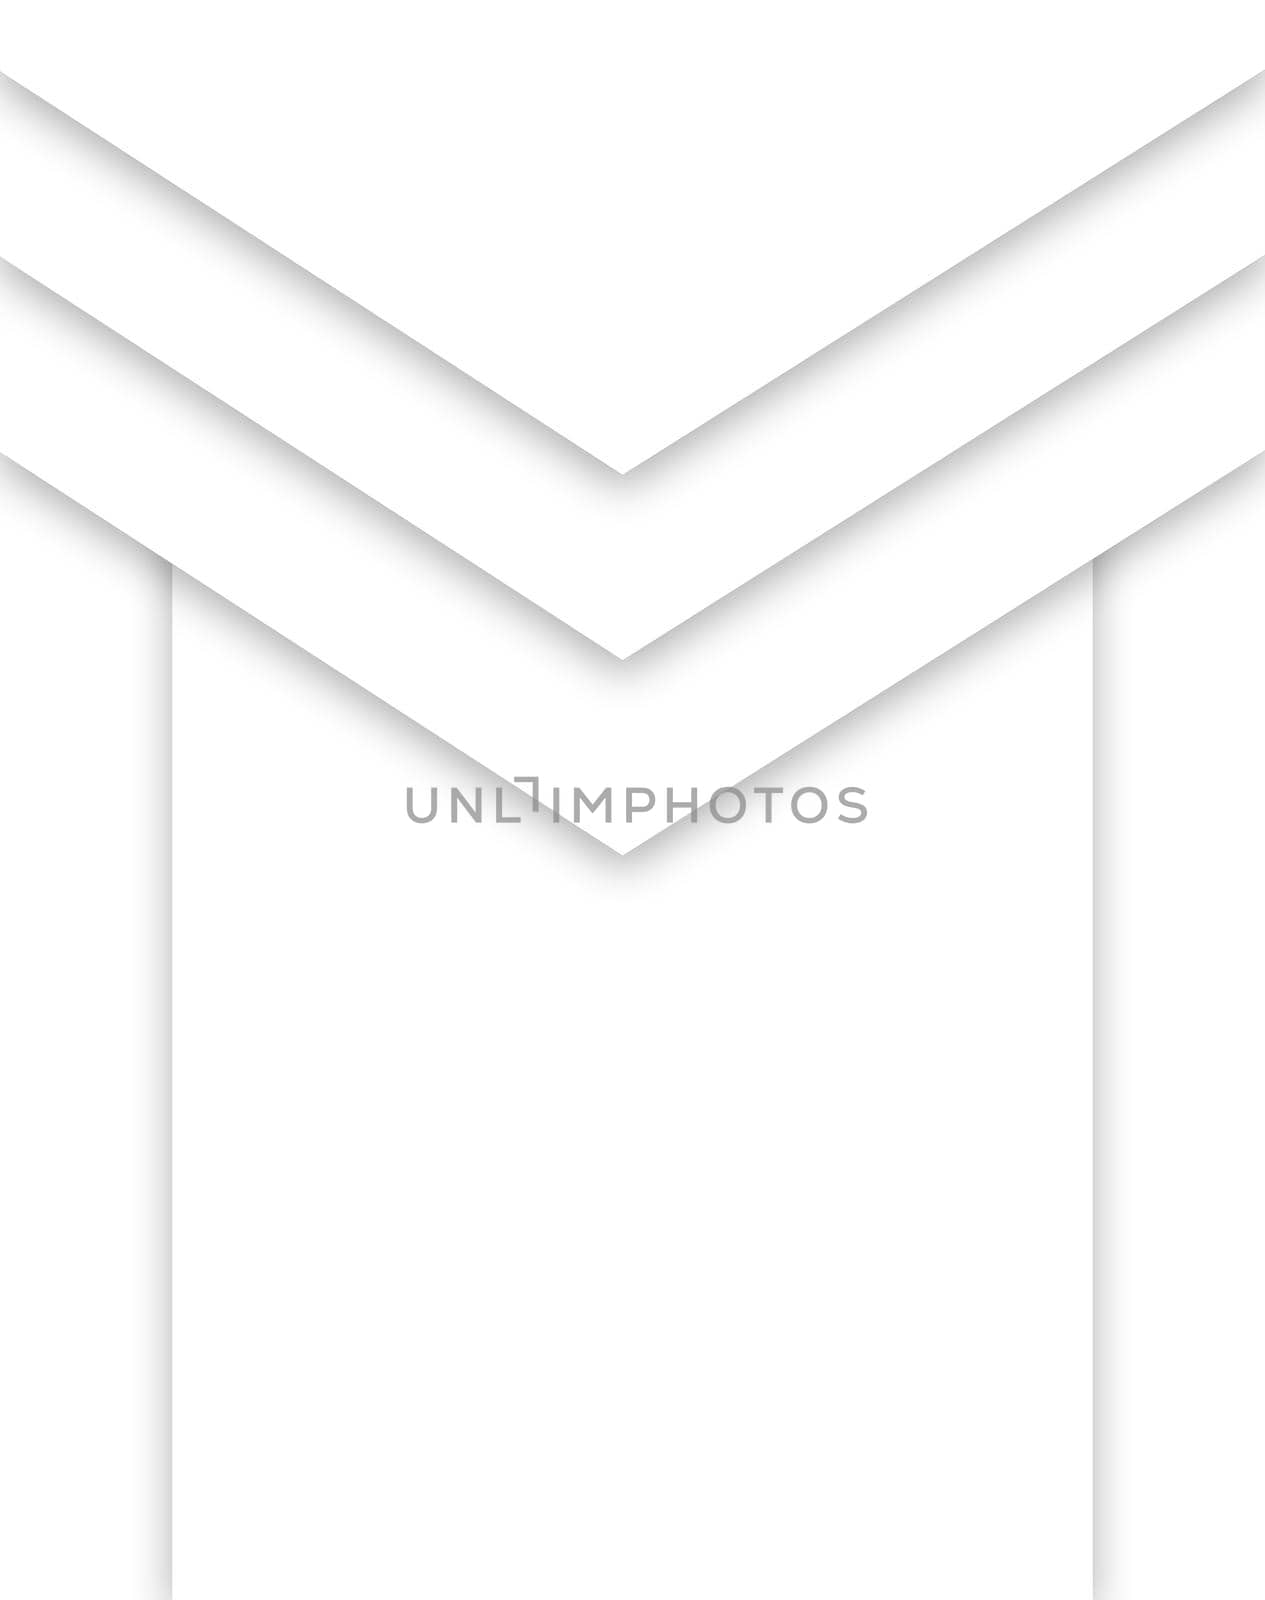 M shaped white Symbol with shadow design with arrows and rectangle, white isolated background, Letter M